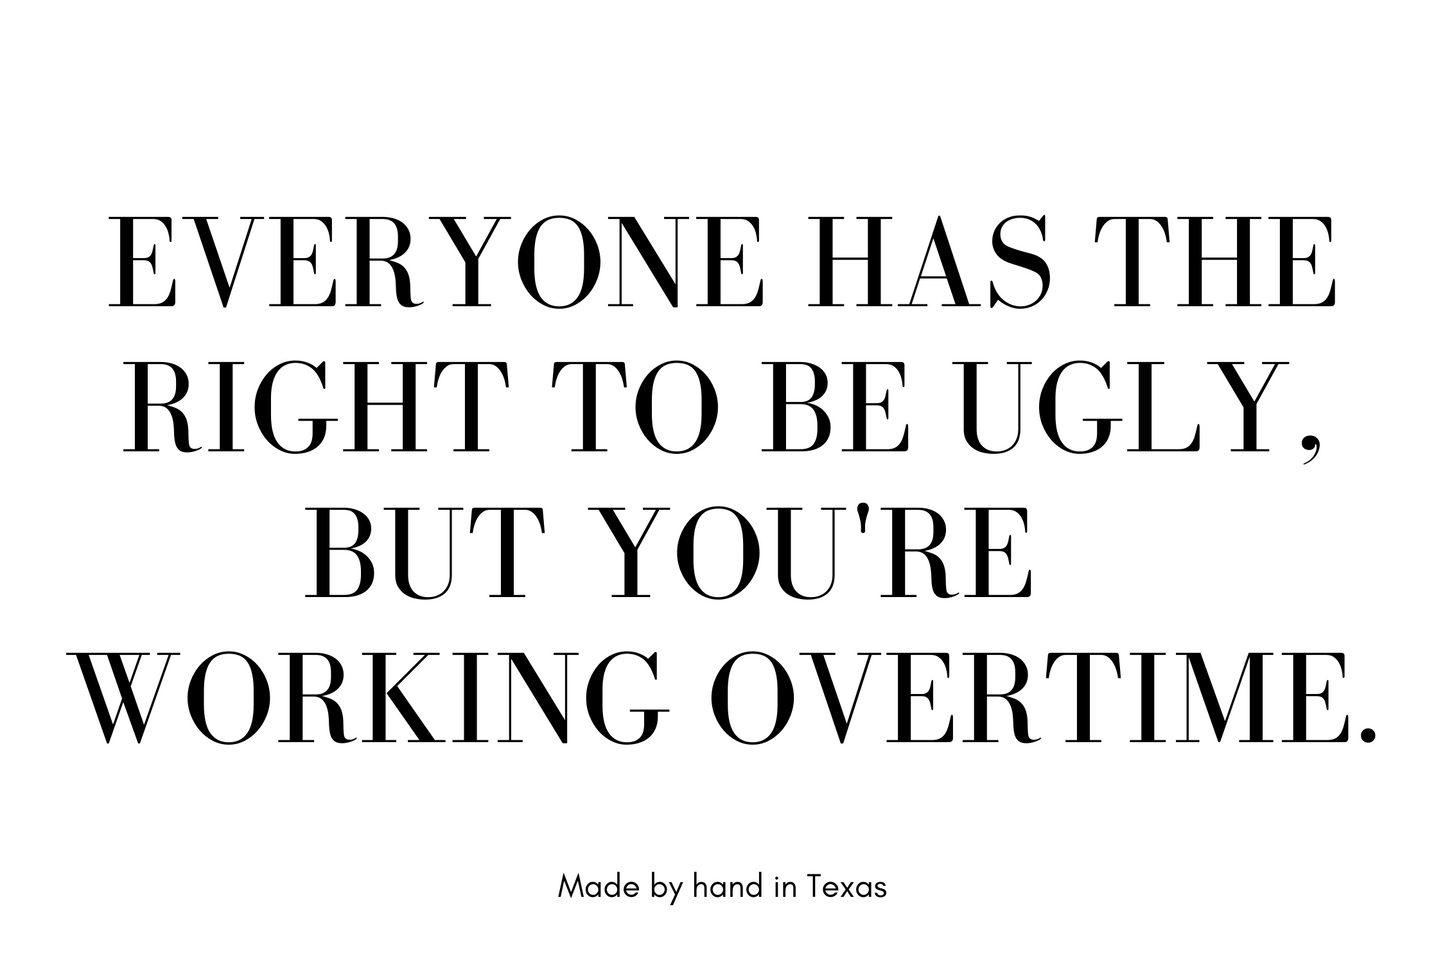 Everyone has the right to be ugly, but you're working overtime.